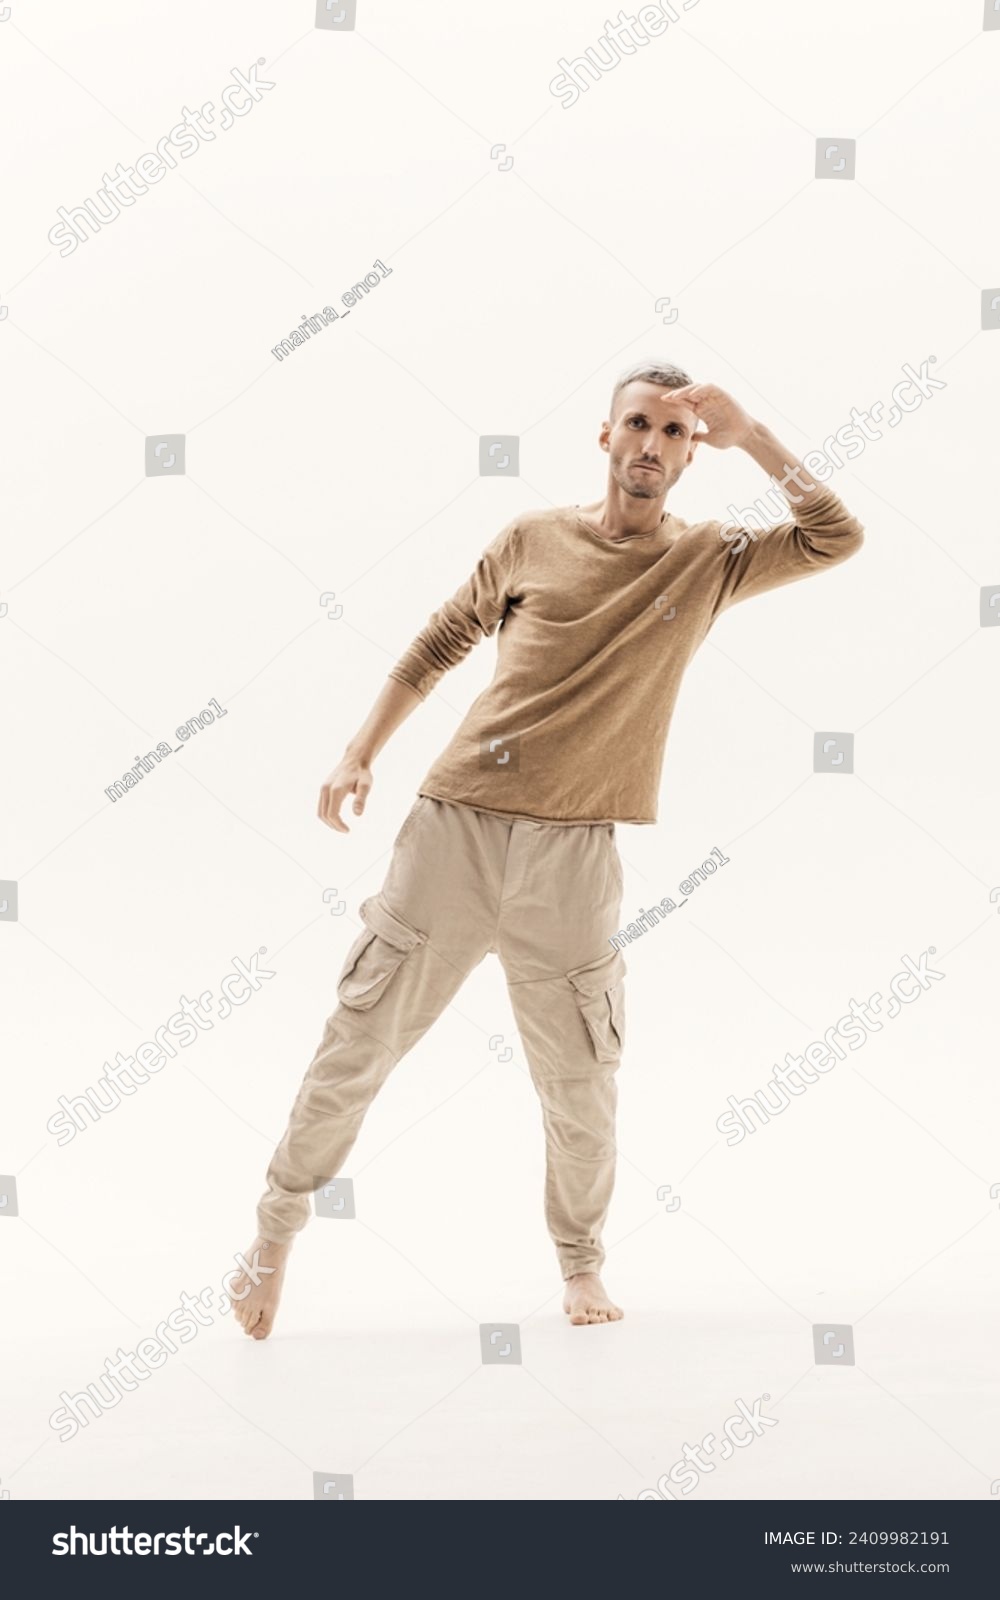 A young man in a beige jumper and cargo pants on a white background. #2409982191